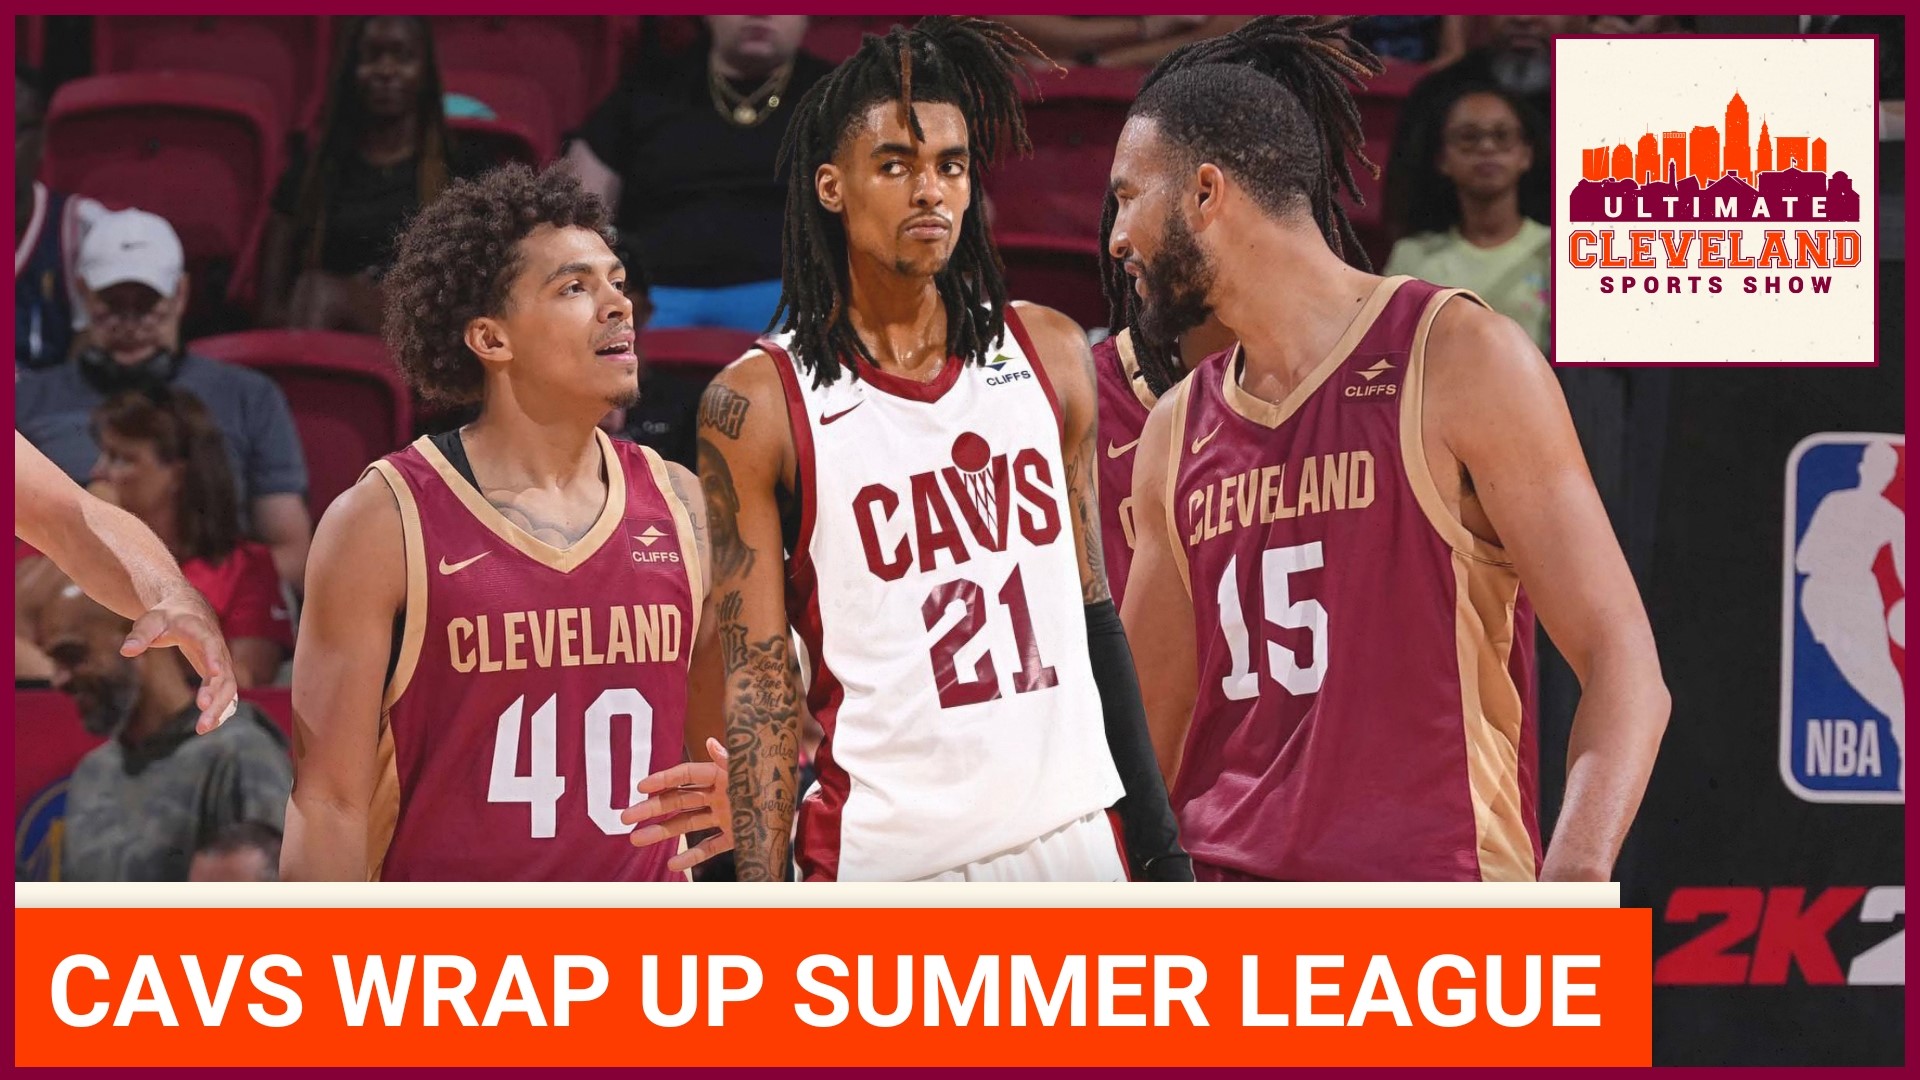 Can the Cleveland Cavaliers secure a spot in Sunday's Summer League Semi Final?